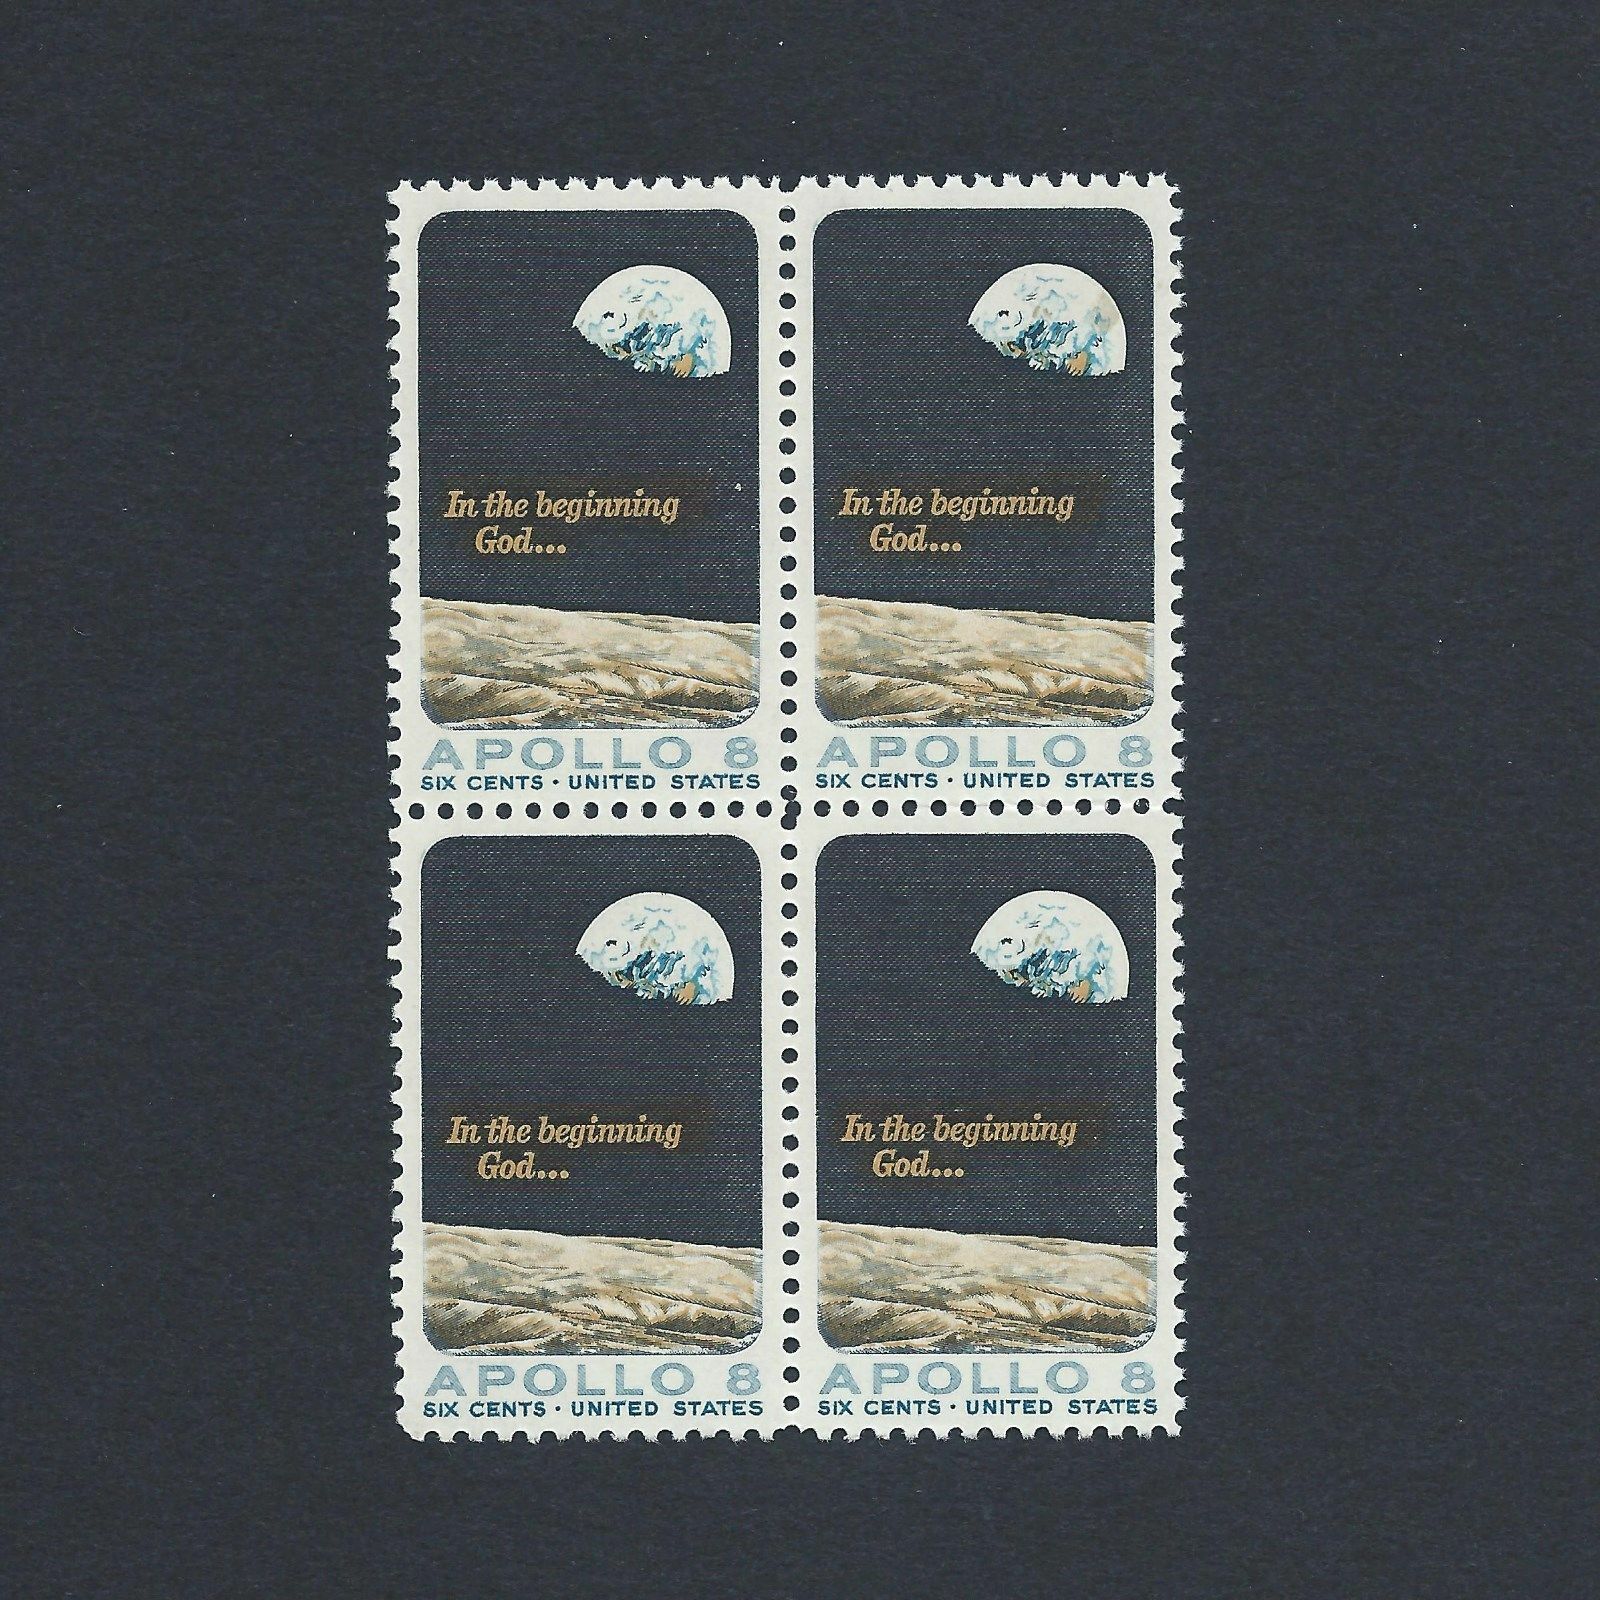 Apollo 8 Space Mission - Vintage Mint Set 4 Stamps 50 Years Old